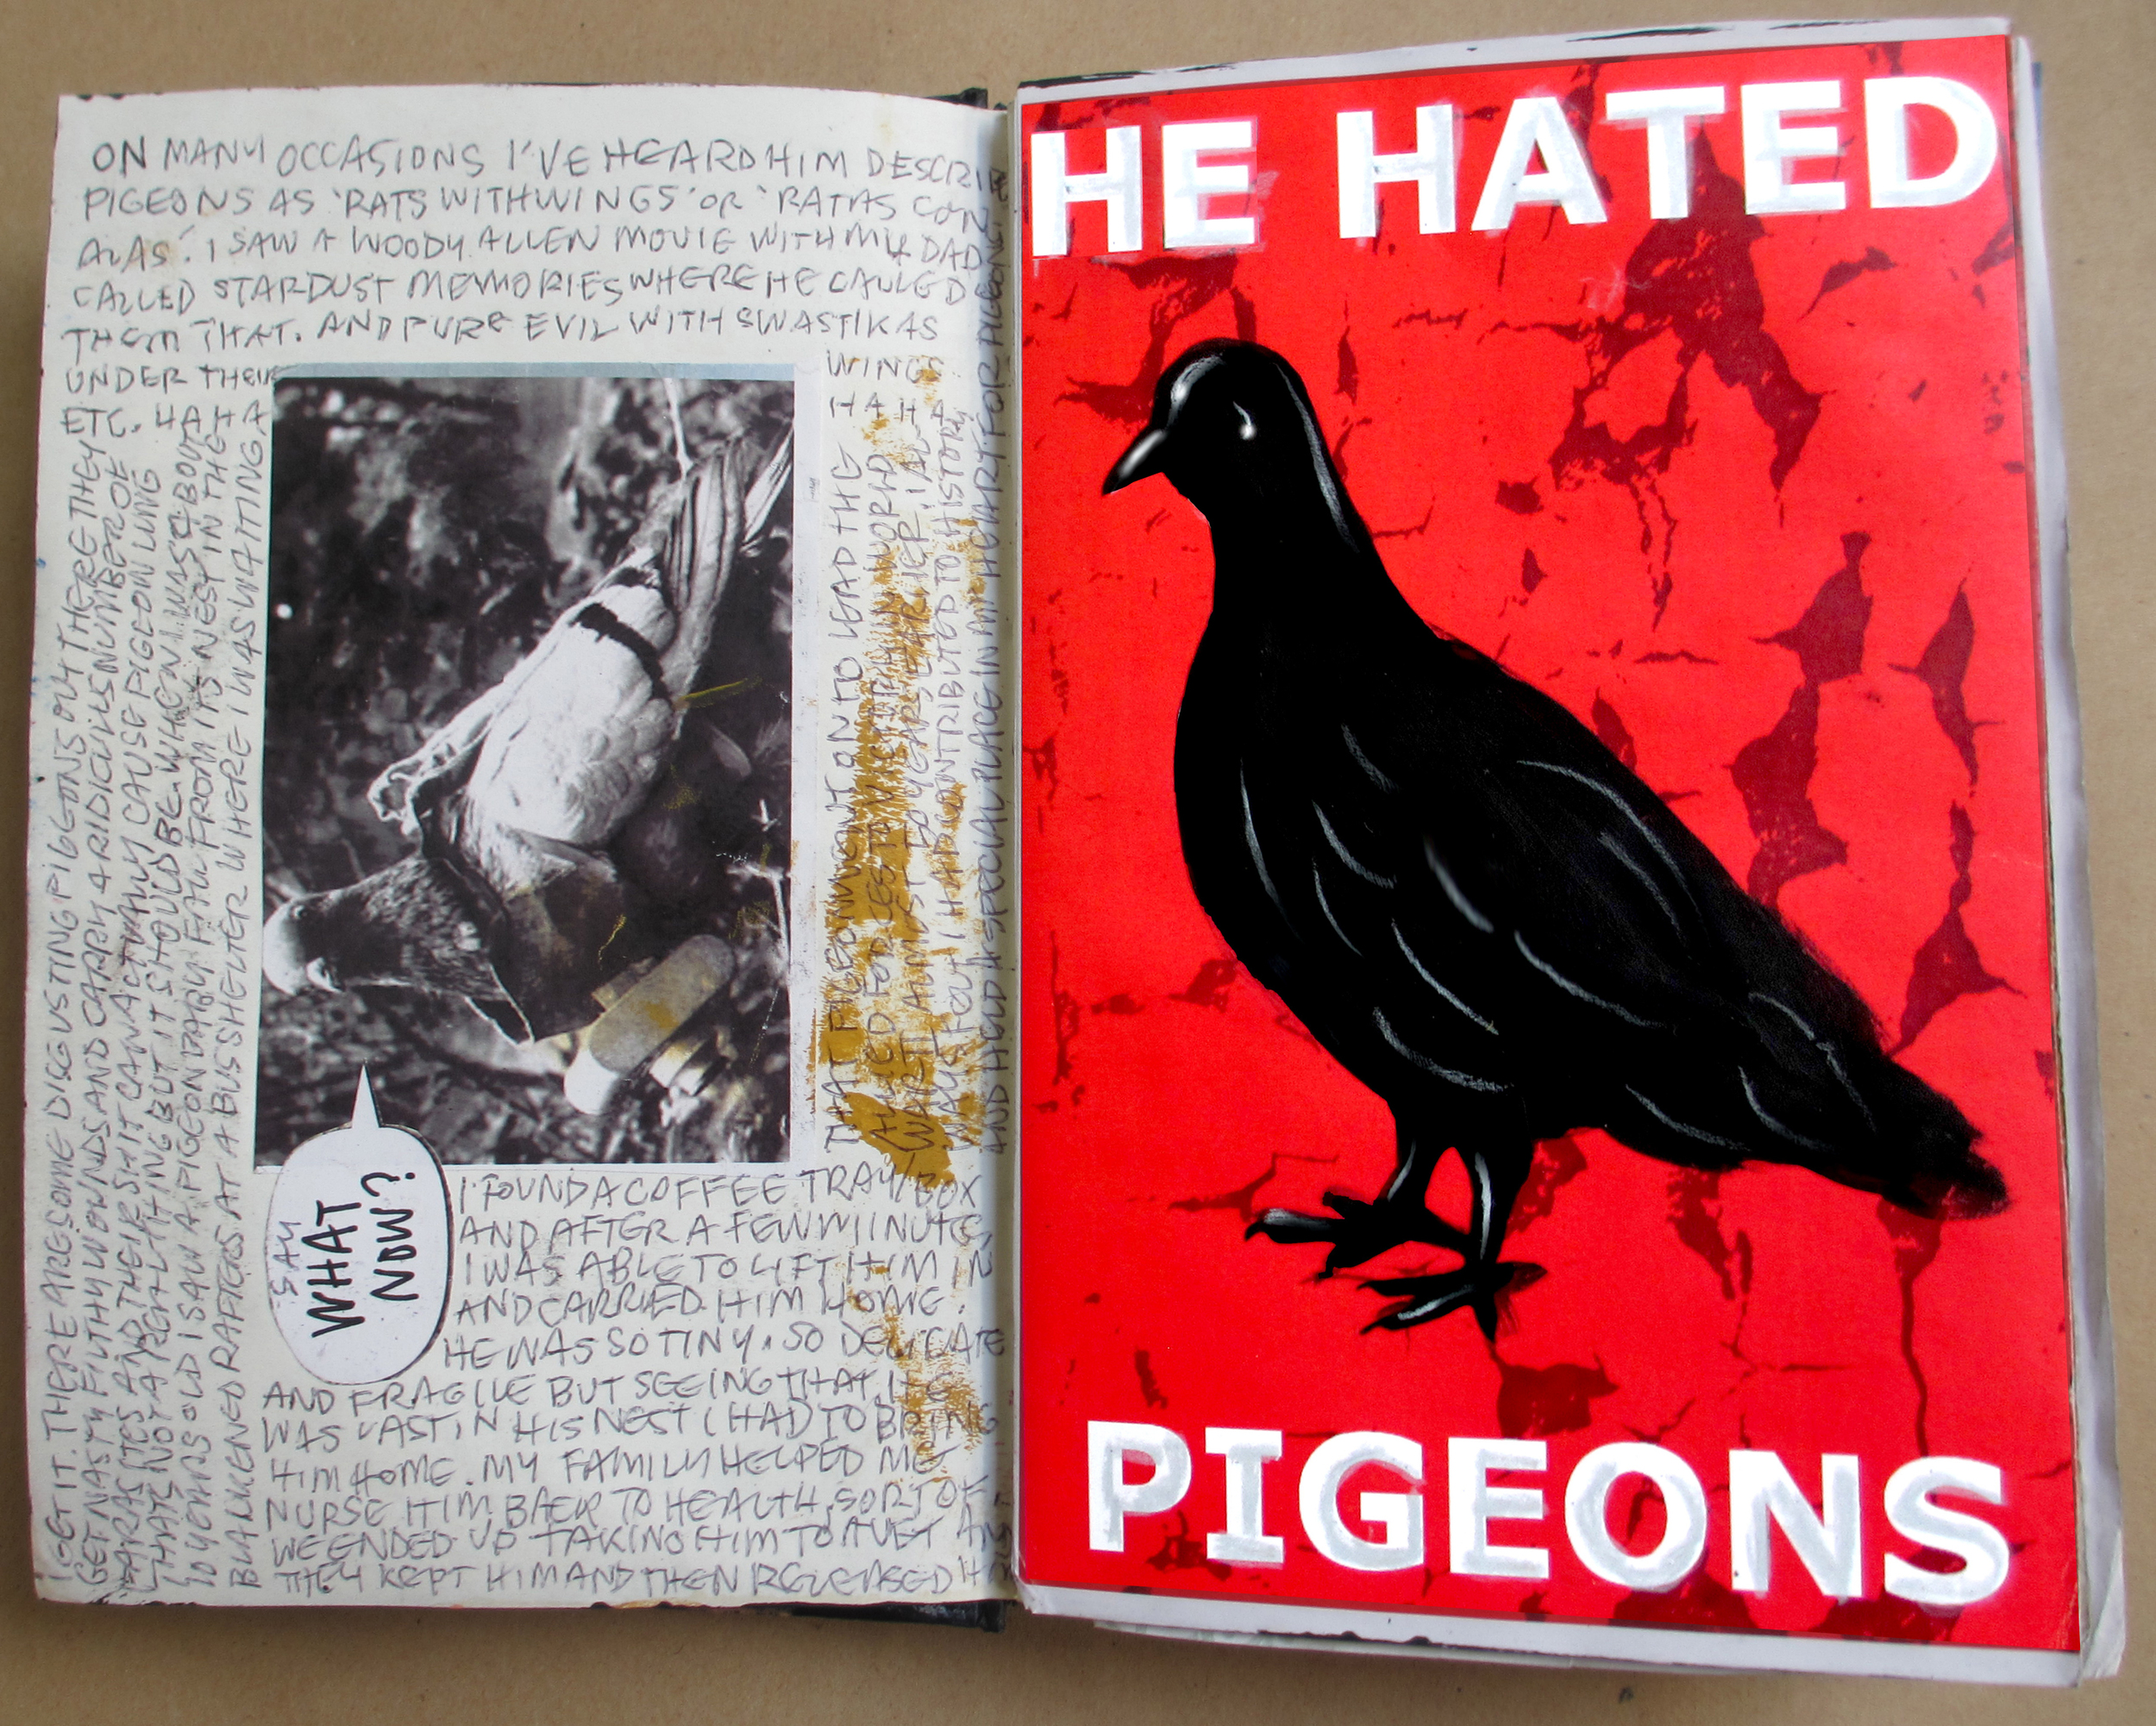 'He Hated Pigeons' 2015